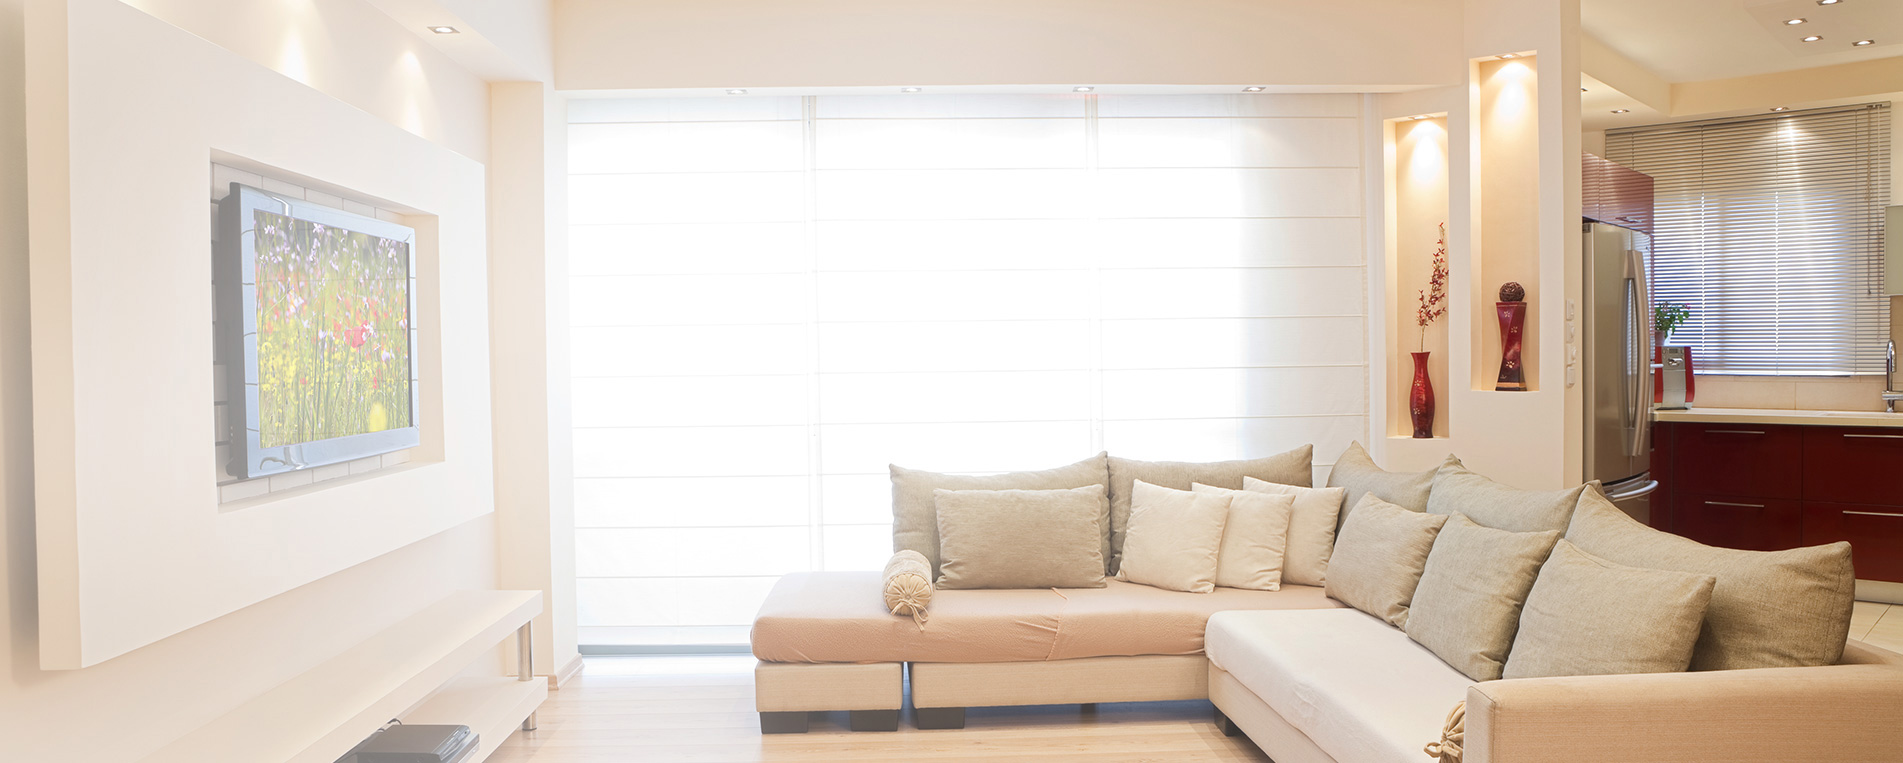 4 Reasons To Pick Roller Shades